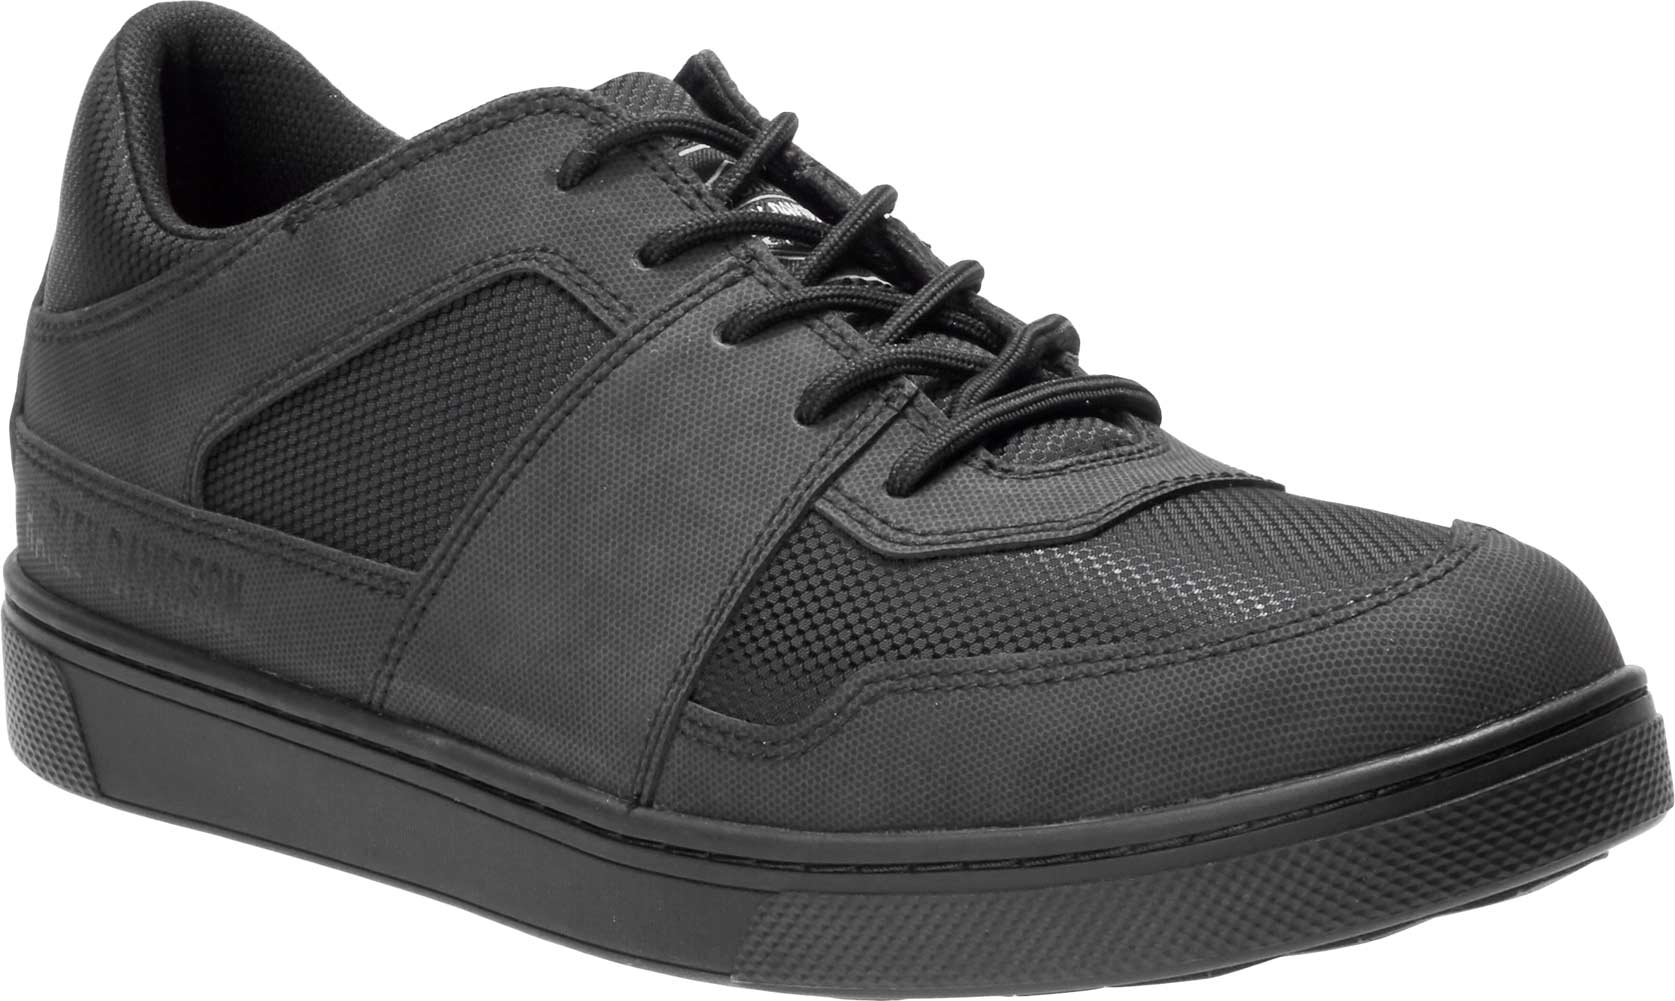 black leather tennis shoes